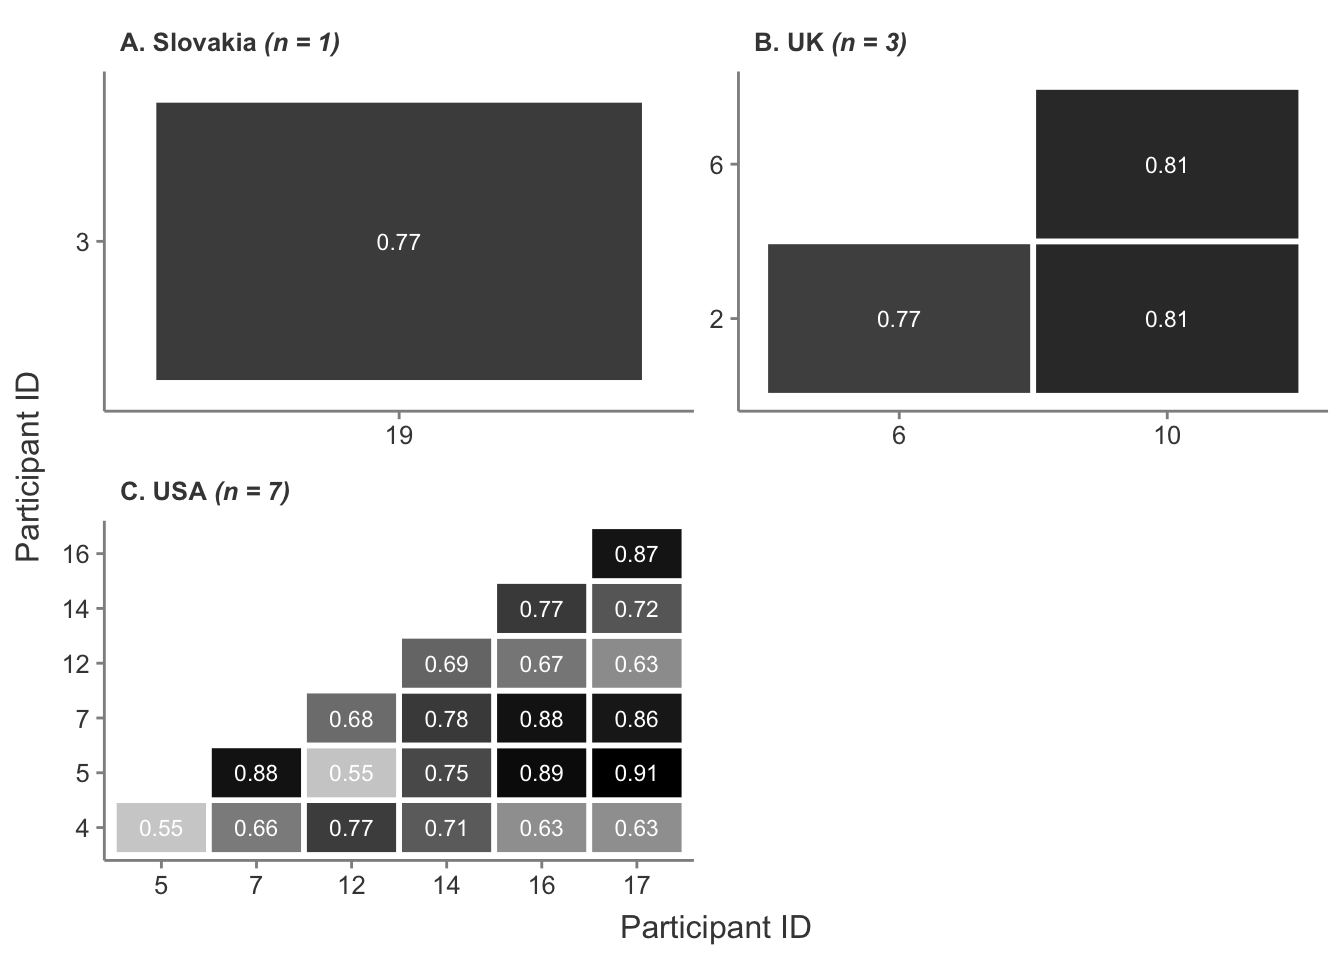 Cosine similarity scores between interview transcripts by country where n > 1 participants from the same country took part.